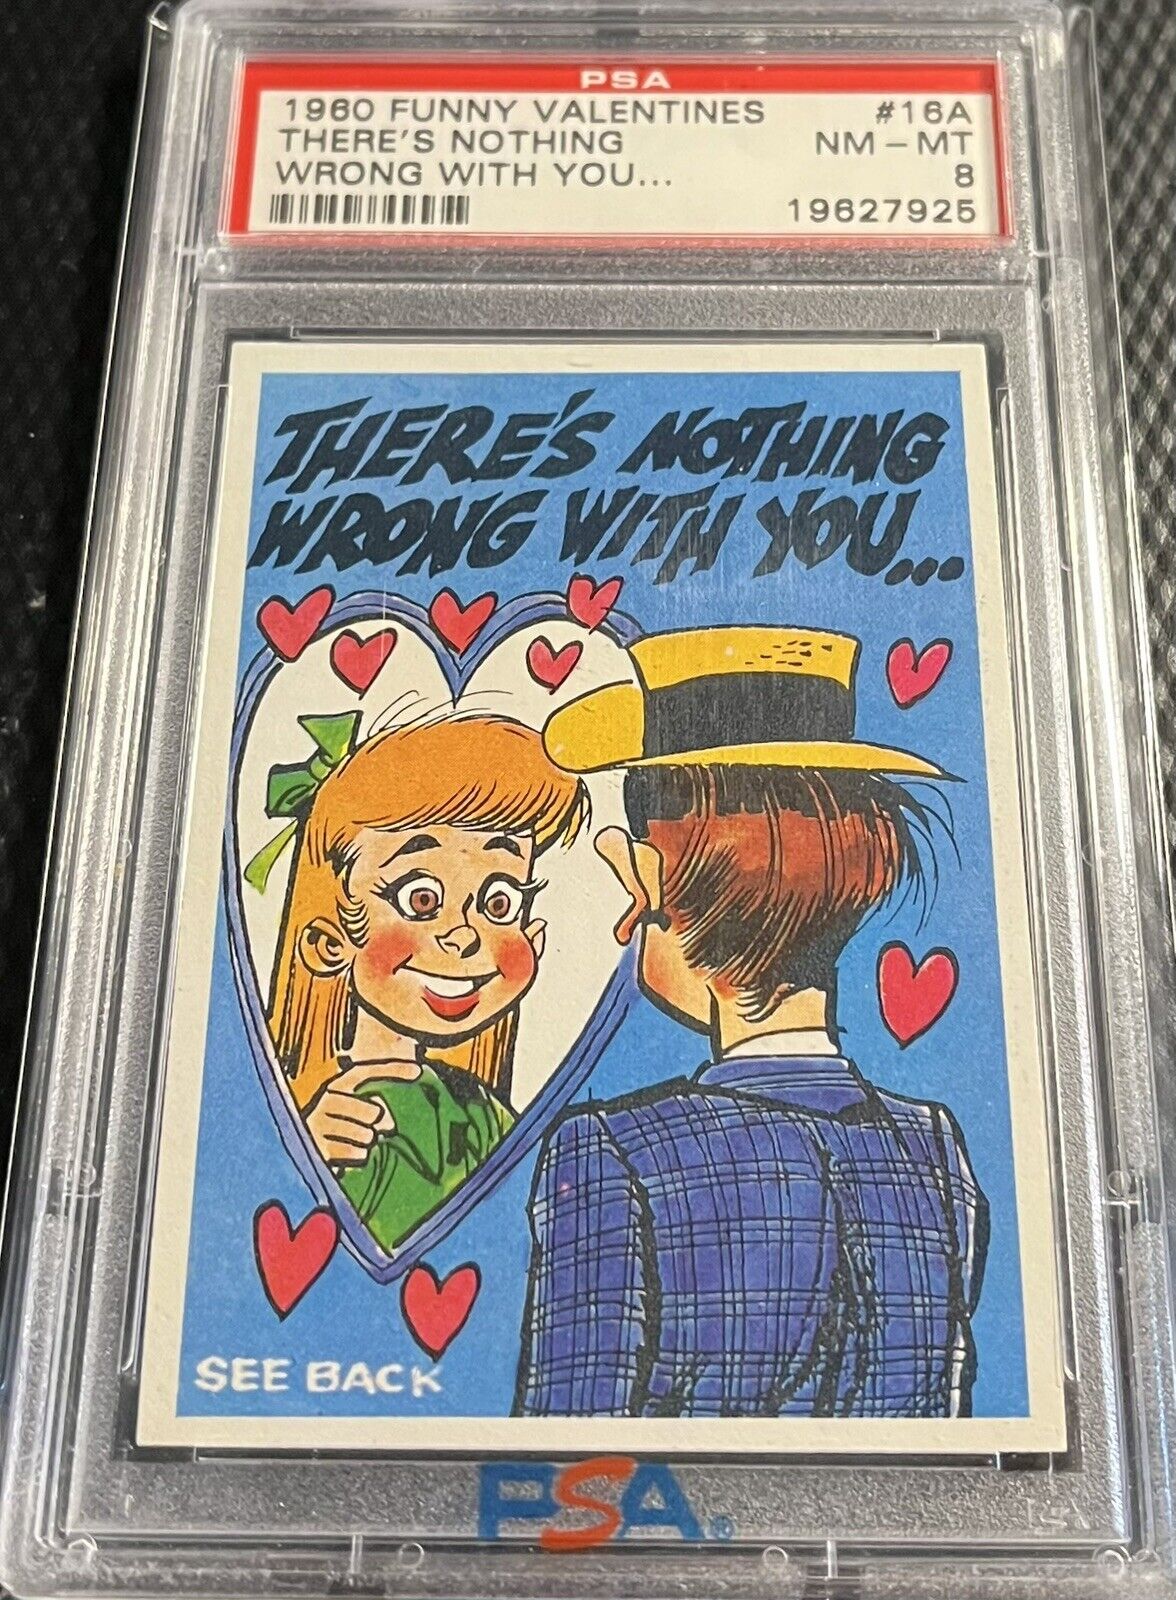 1960 Topps PSA 8 Vintage Funny Valentines #16A Graded NM-MT - Clean Holder